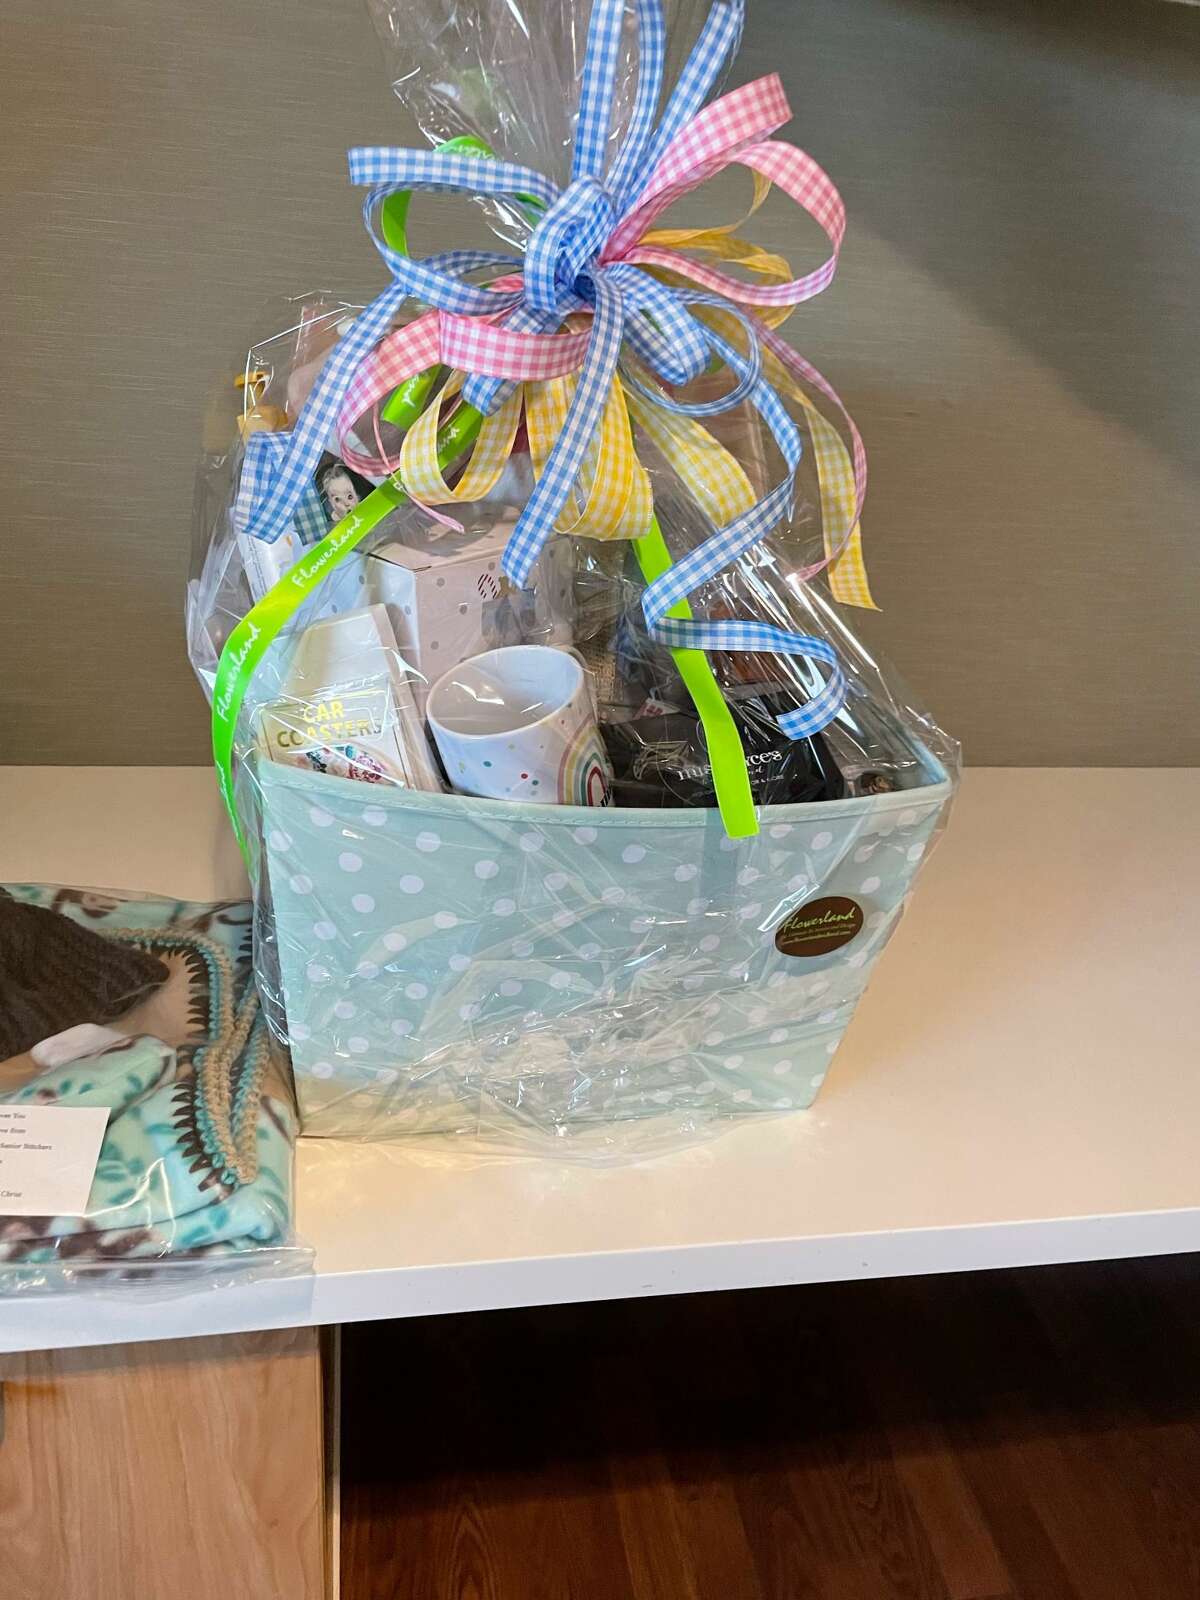 The family will be presented with a gift basket full of items for the new baby and mom.